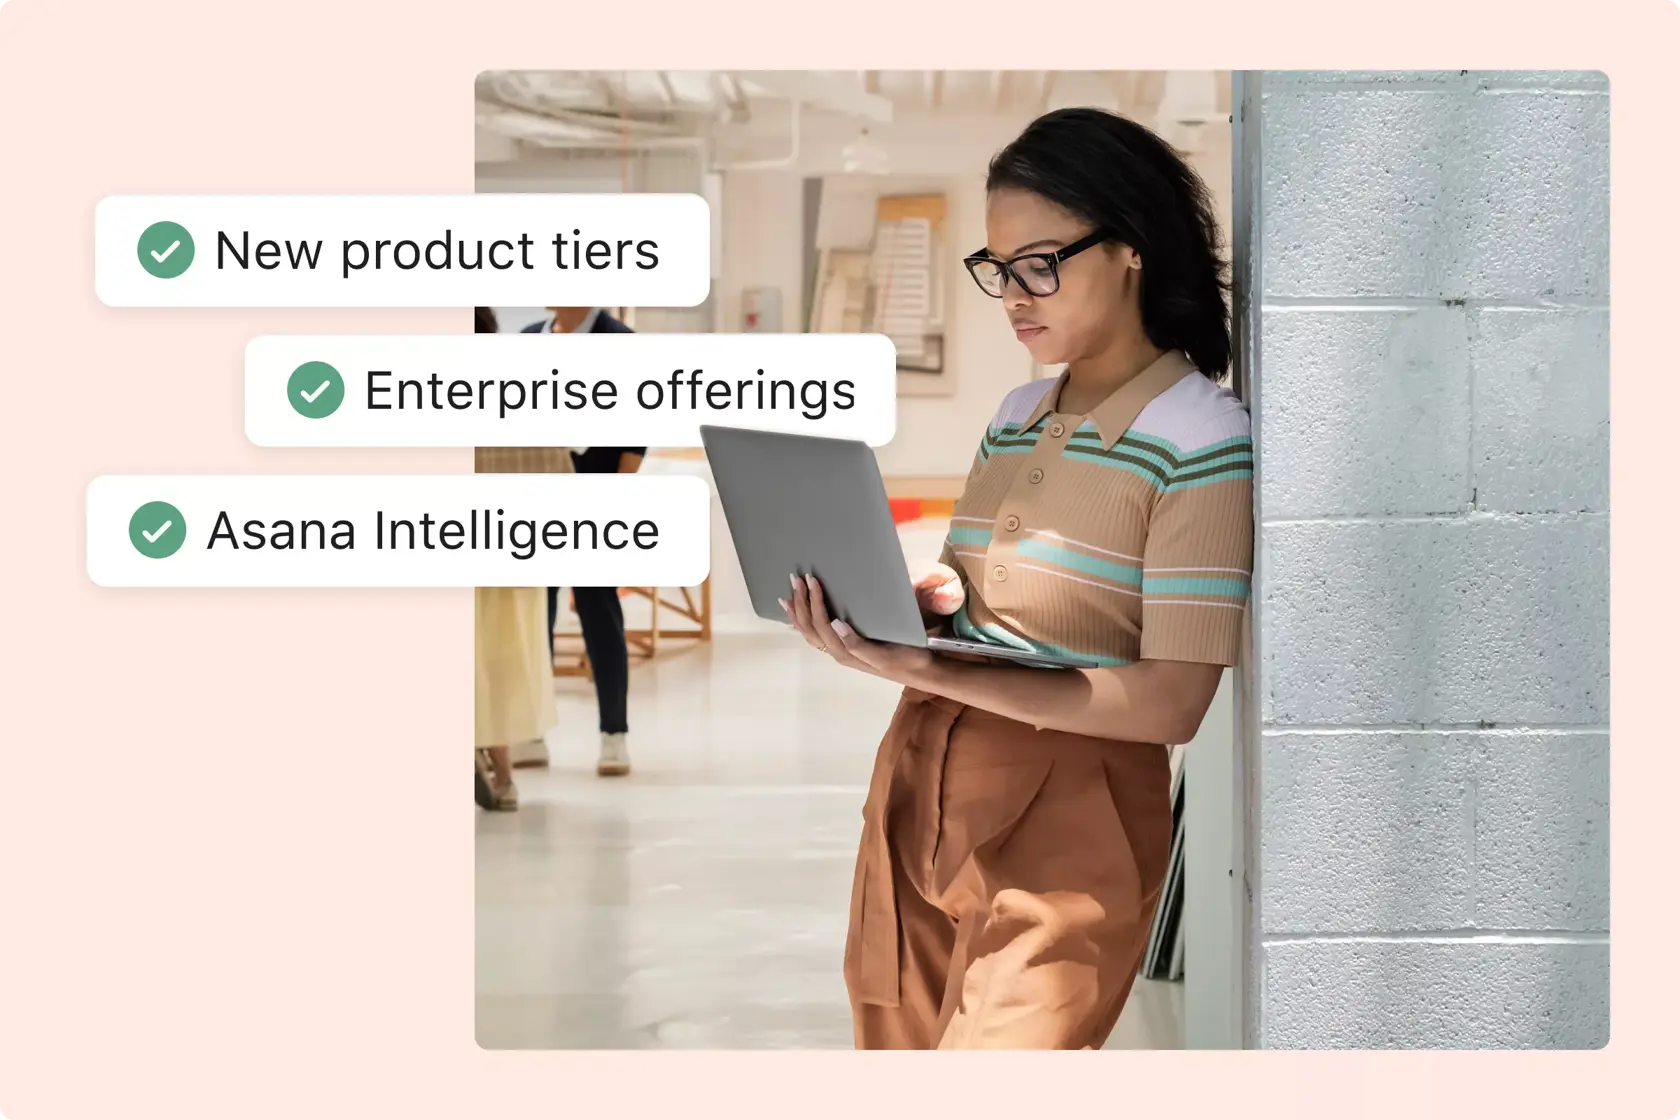 Asana delivers AI to companies of every size and robust enterprise offerings with new product tiers